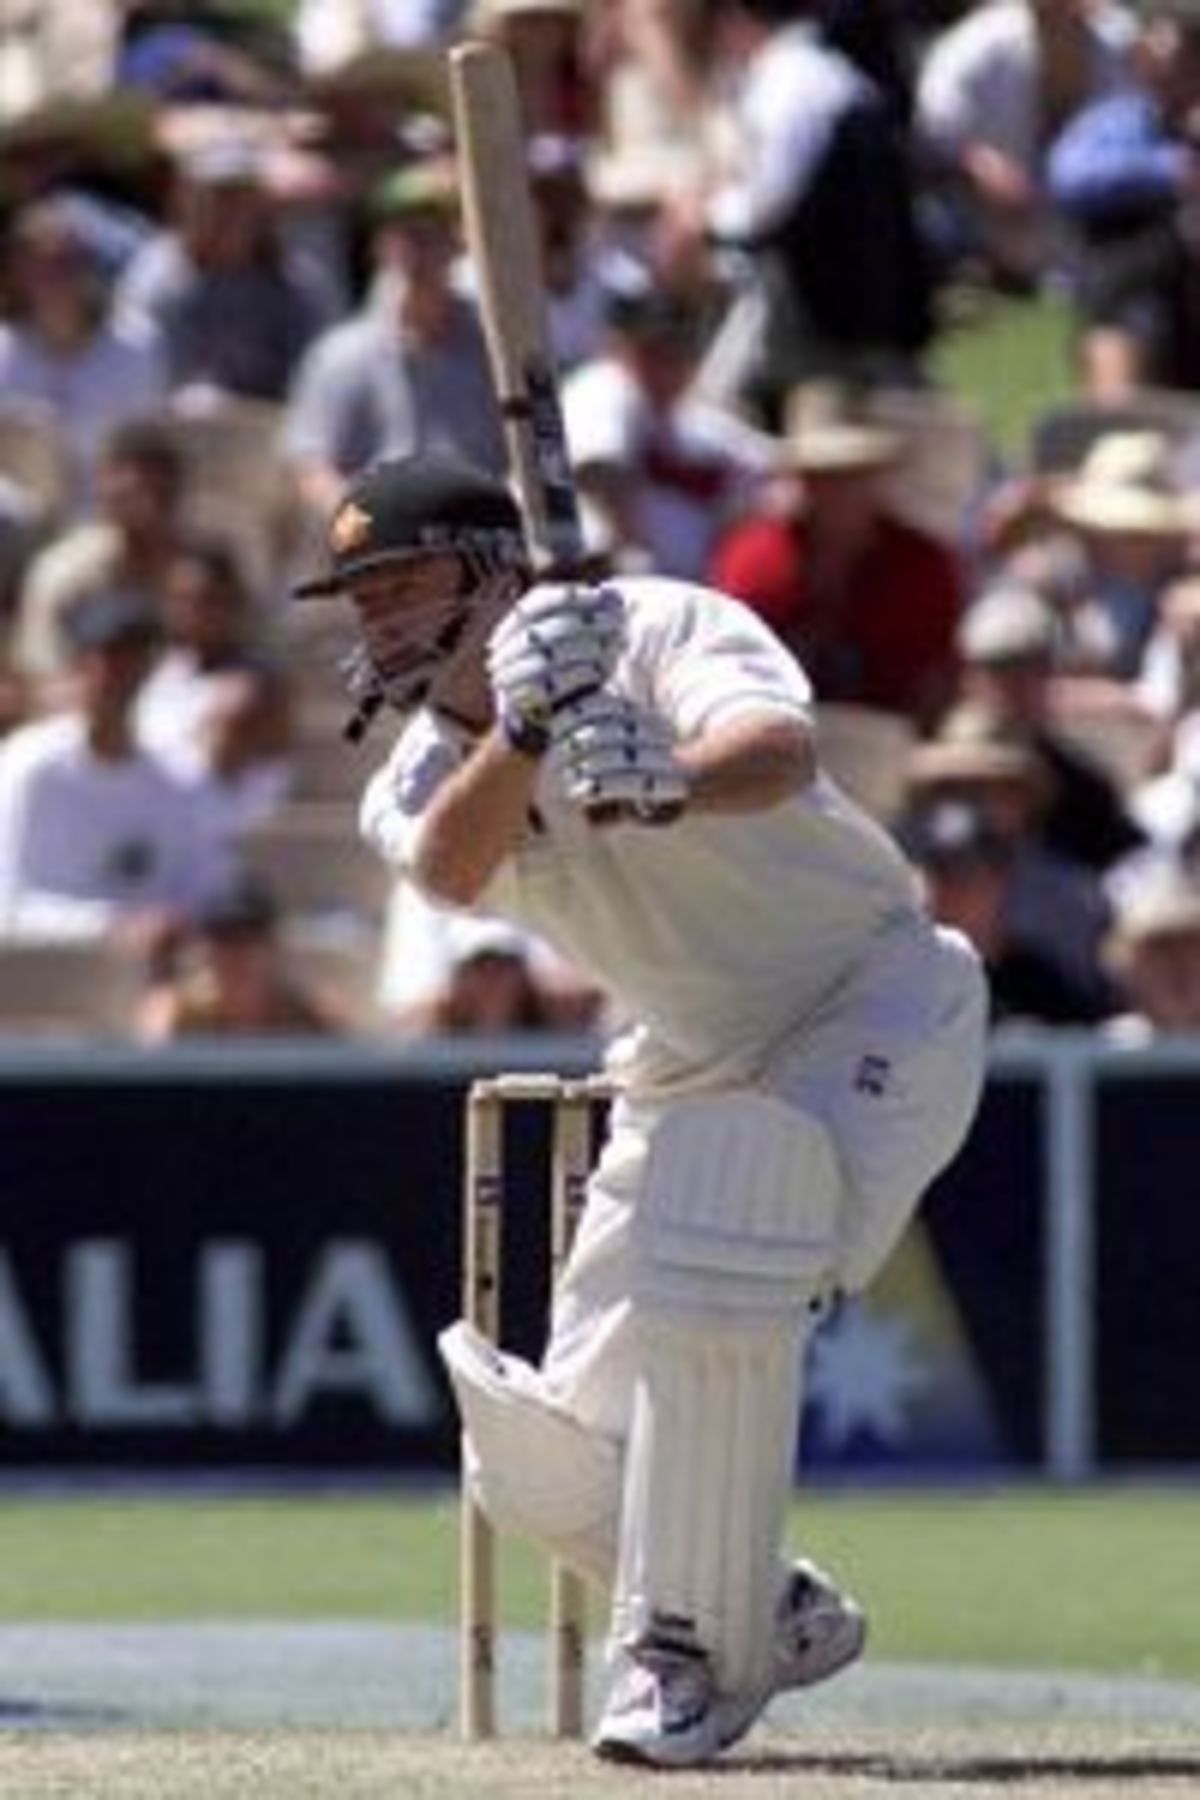 10 Dec 1999: Steve Waugh of Australia hits out, on day one of the first test between Australia and India, at the Adelaide Oval, Adelaide, Australia.